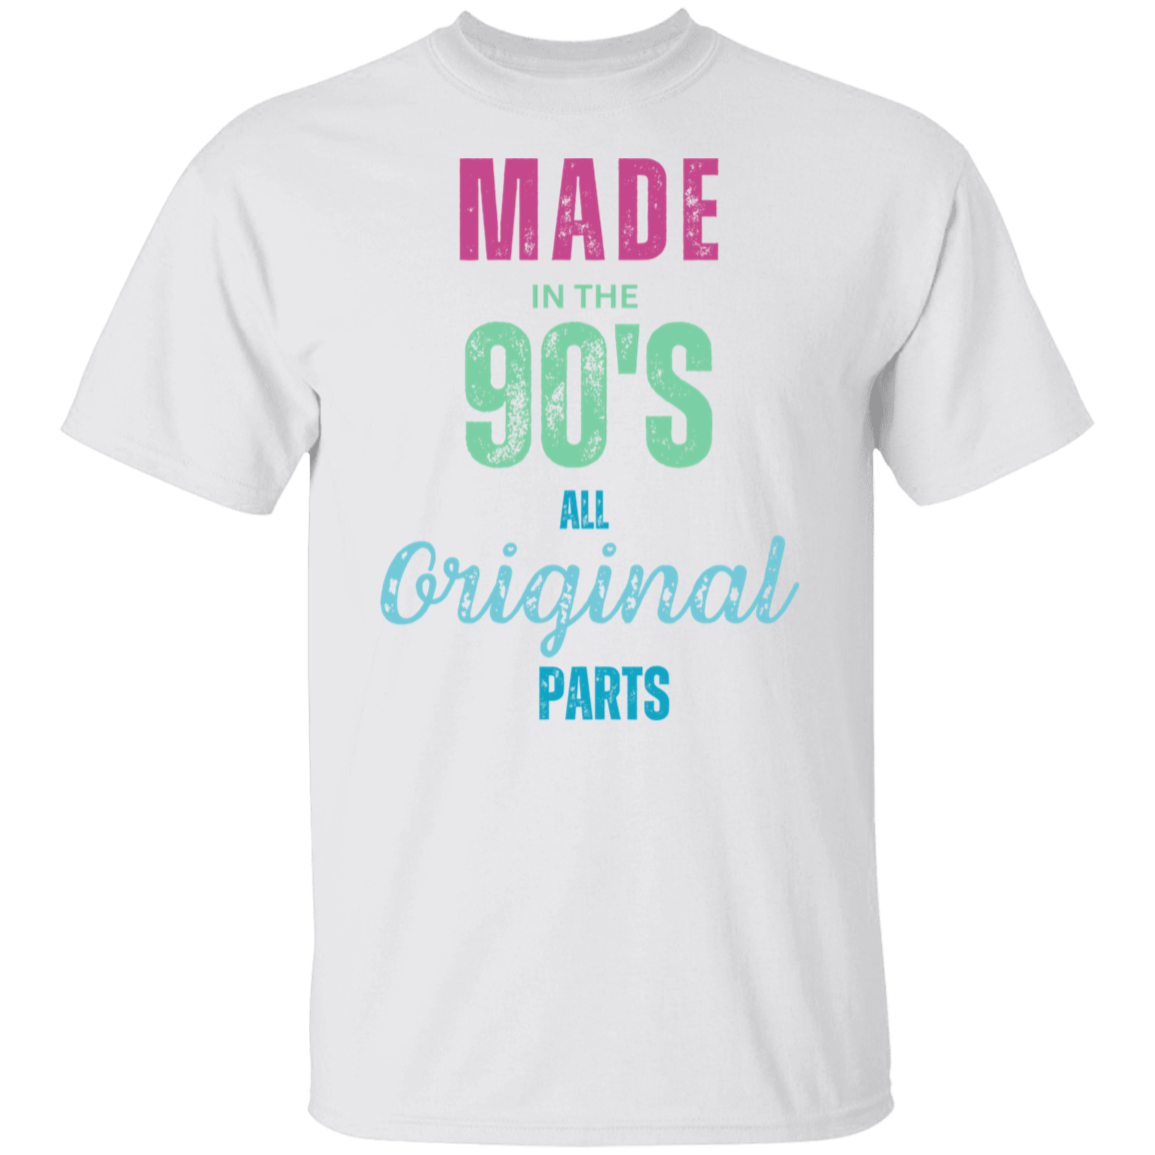 MADE IN THE 90'S   5.3 oz. T-Shirt